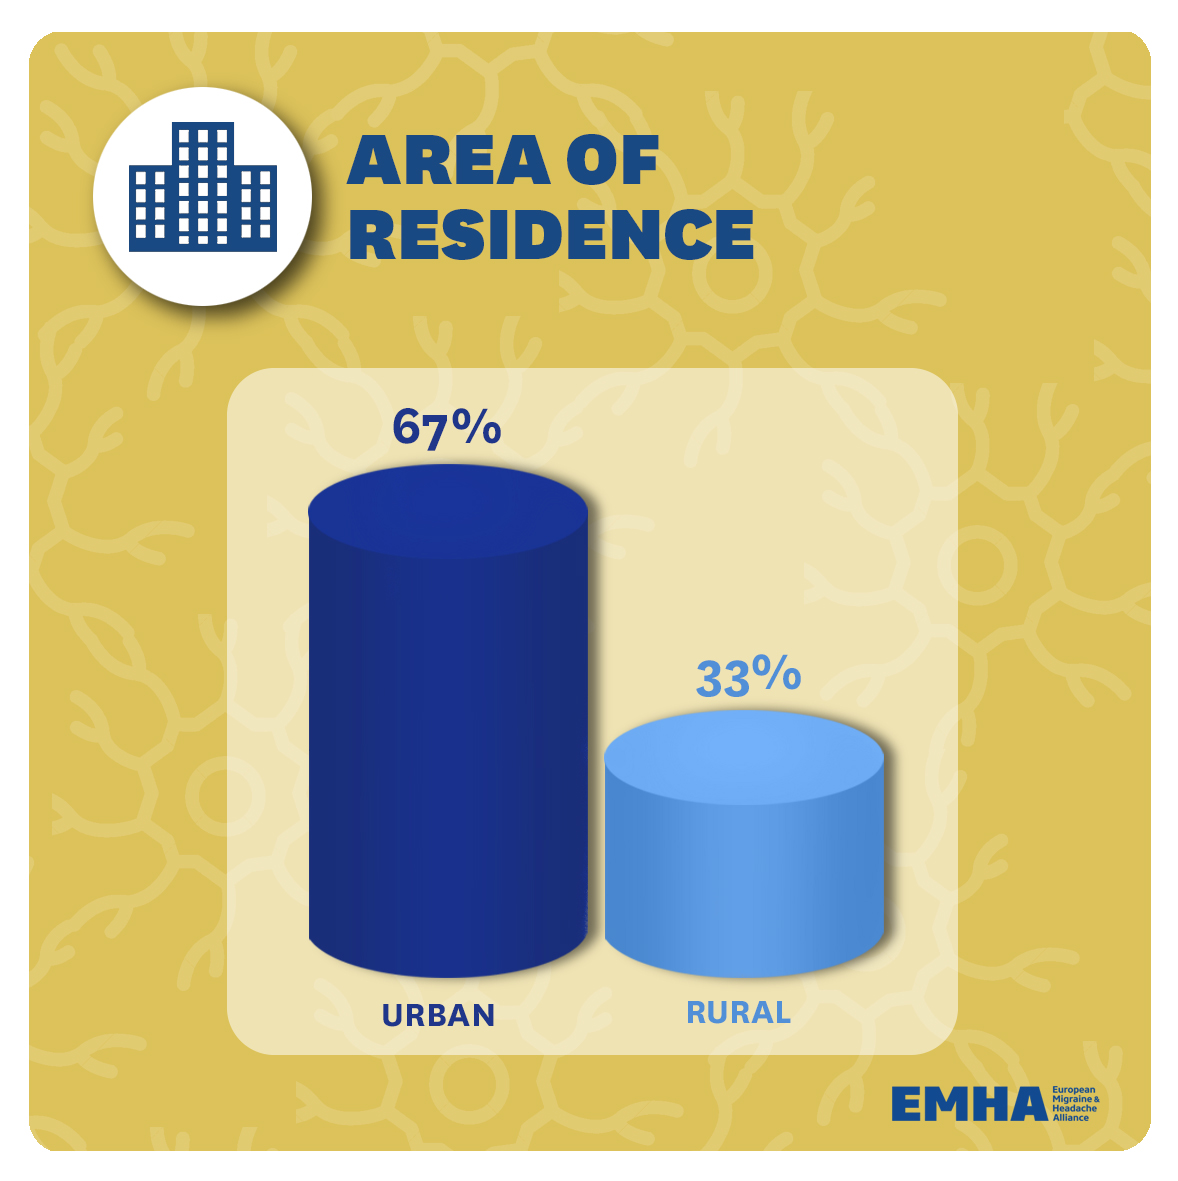 4.-Area-of-residence